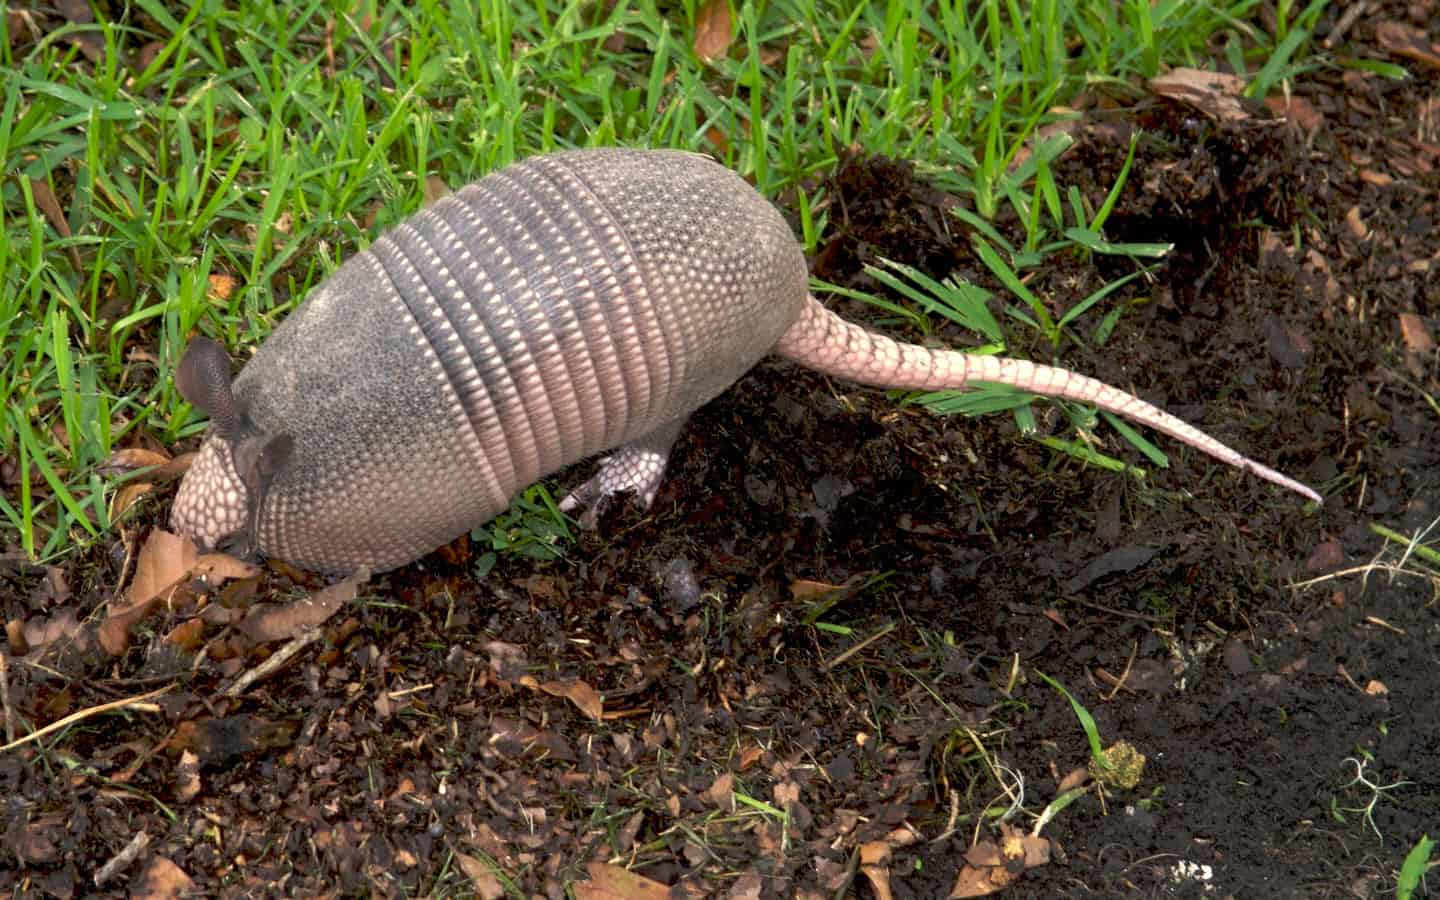 Armadillo with a long, pink tail walking on a dirt path